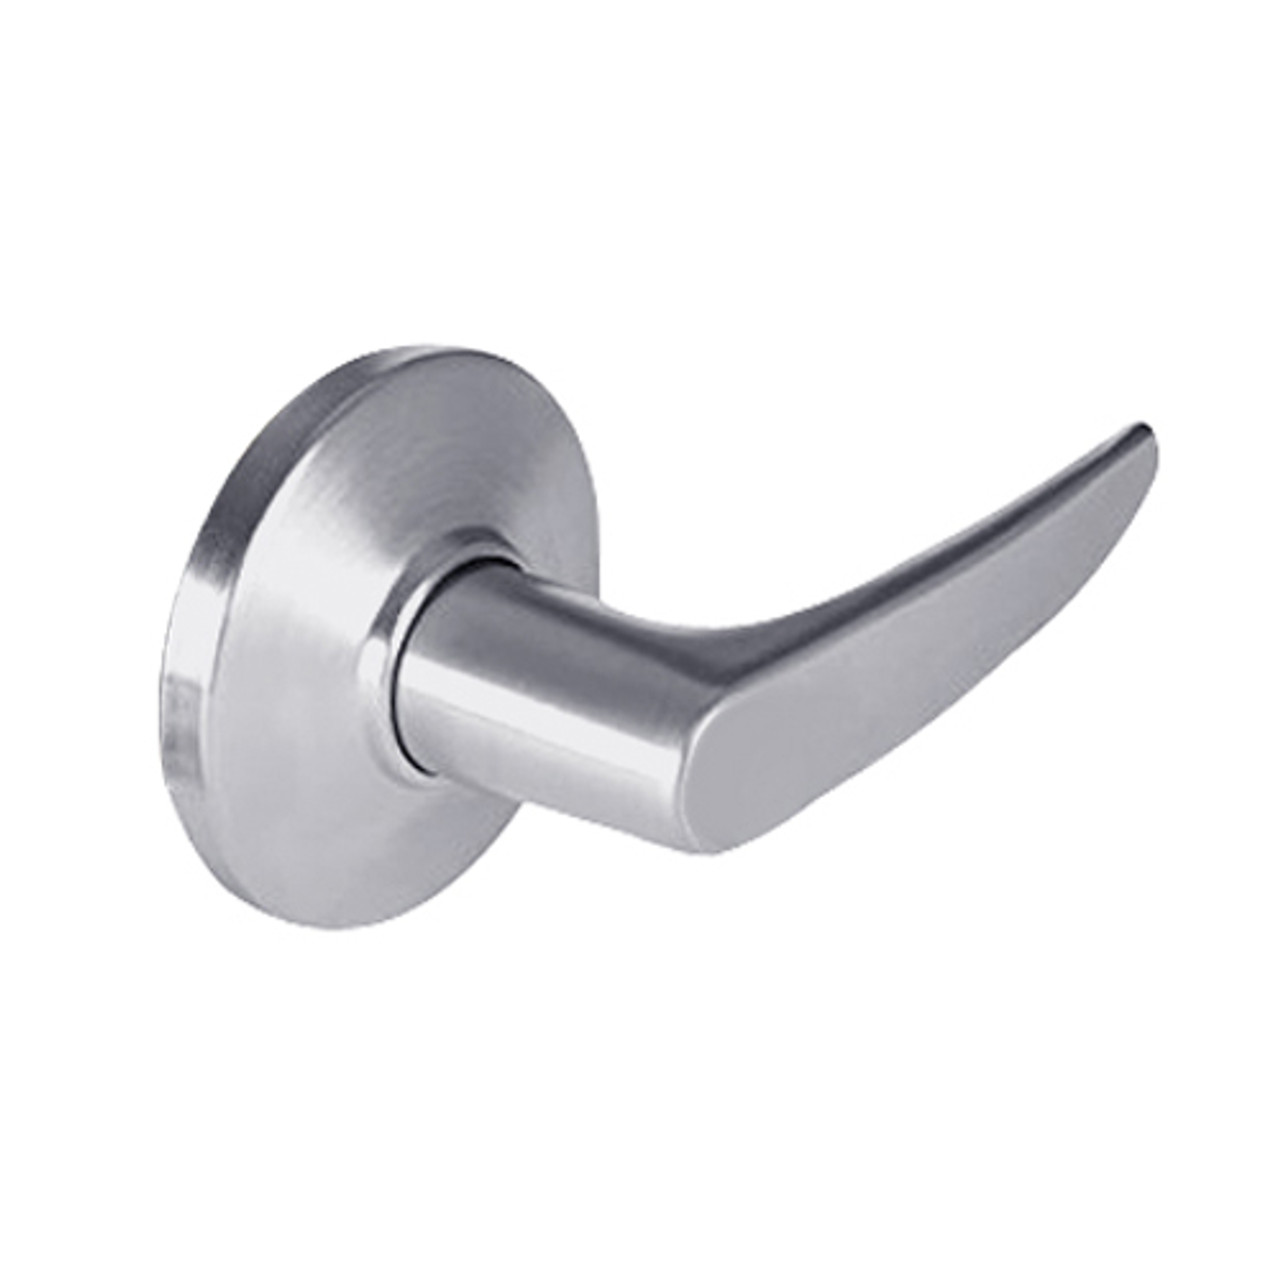 9K30M16DS3626 Best 9K Series Communicating Heavy Duty Cylindrical Lever Locks with Curved Without Return Lever Design in Satin Chrome